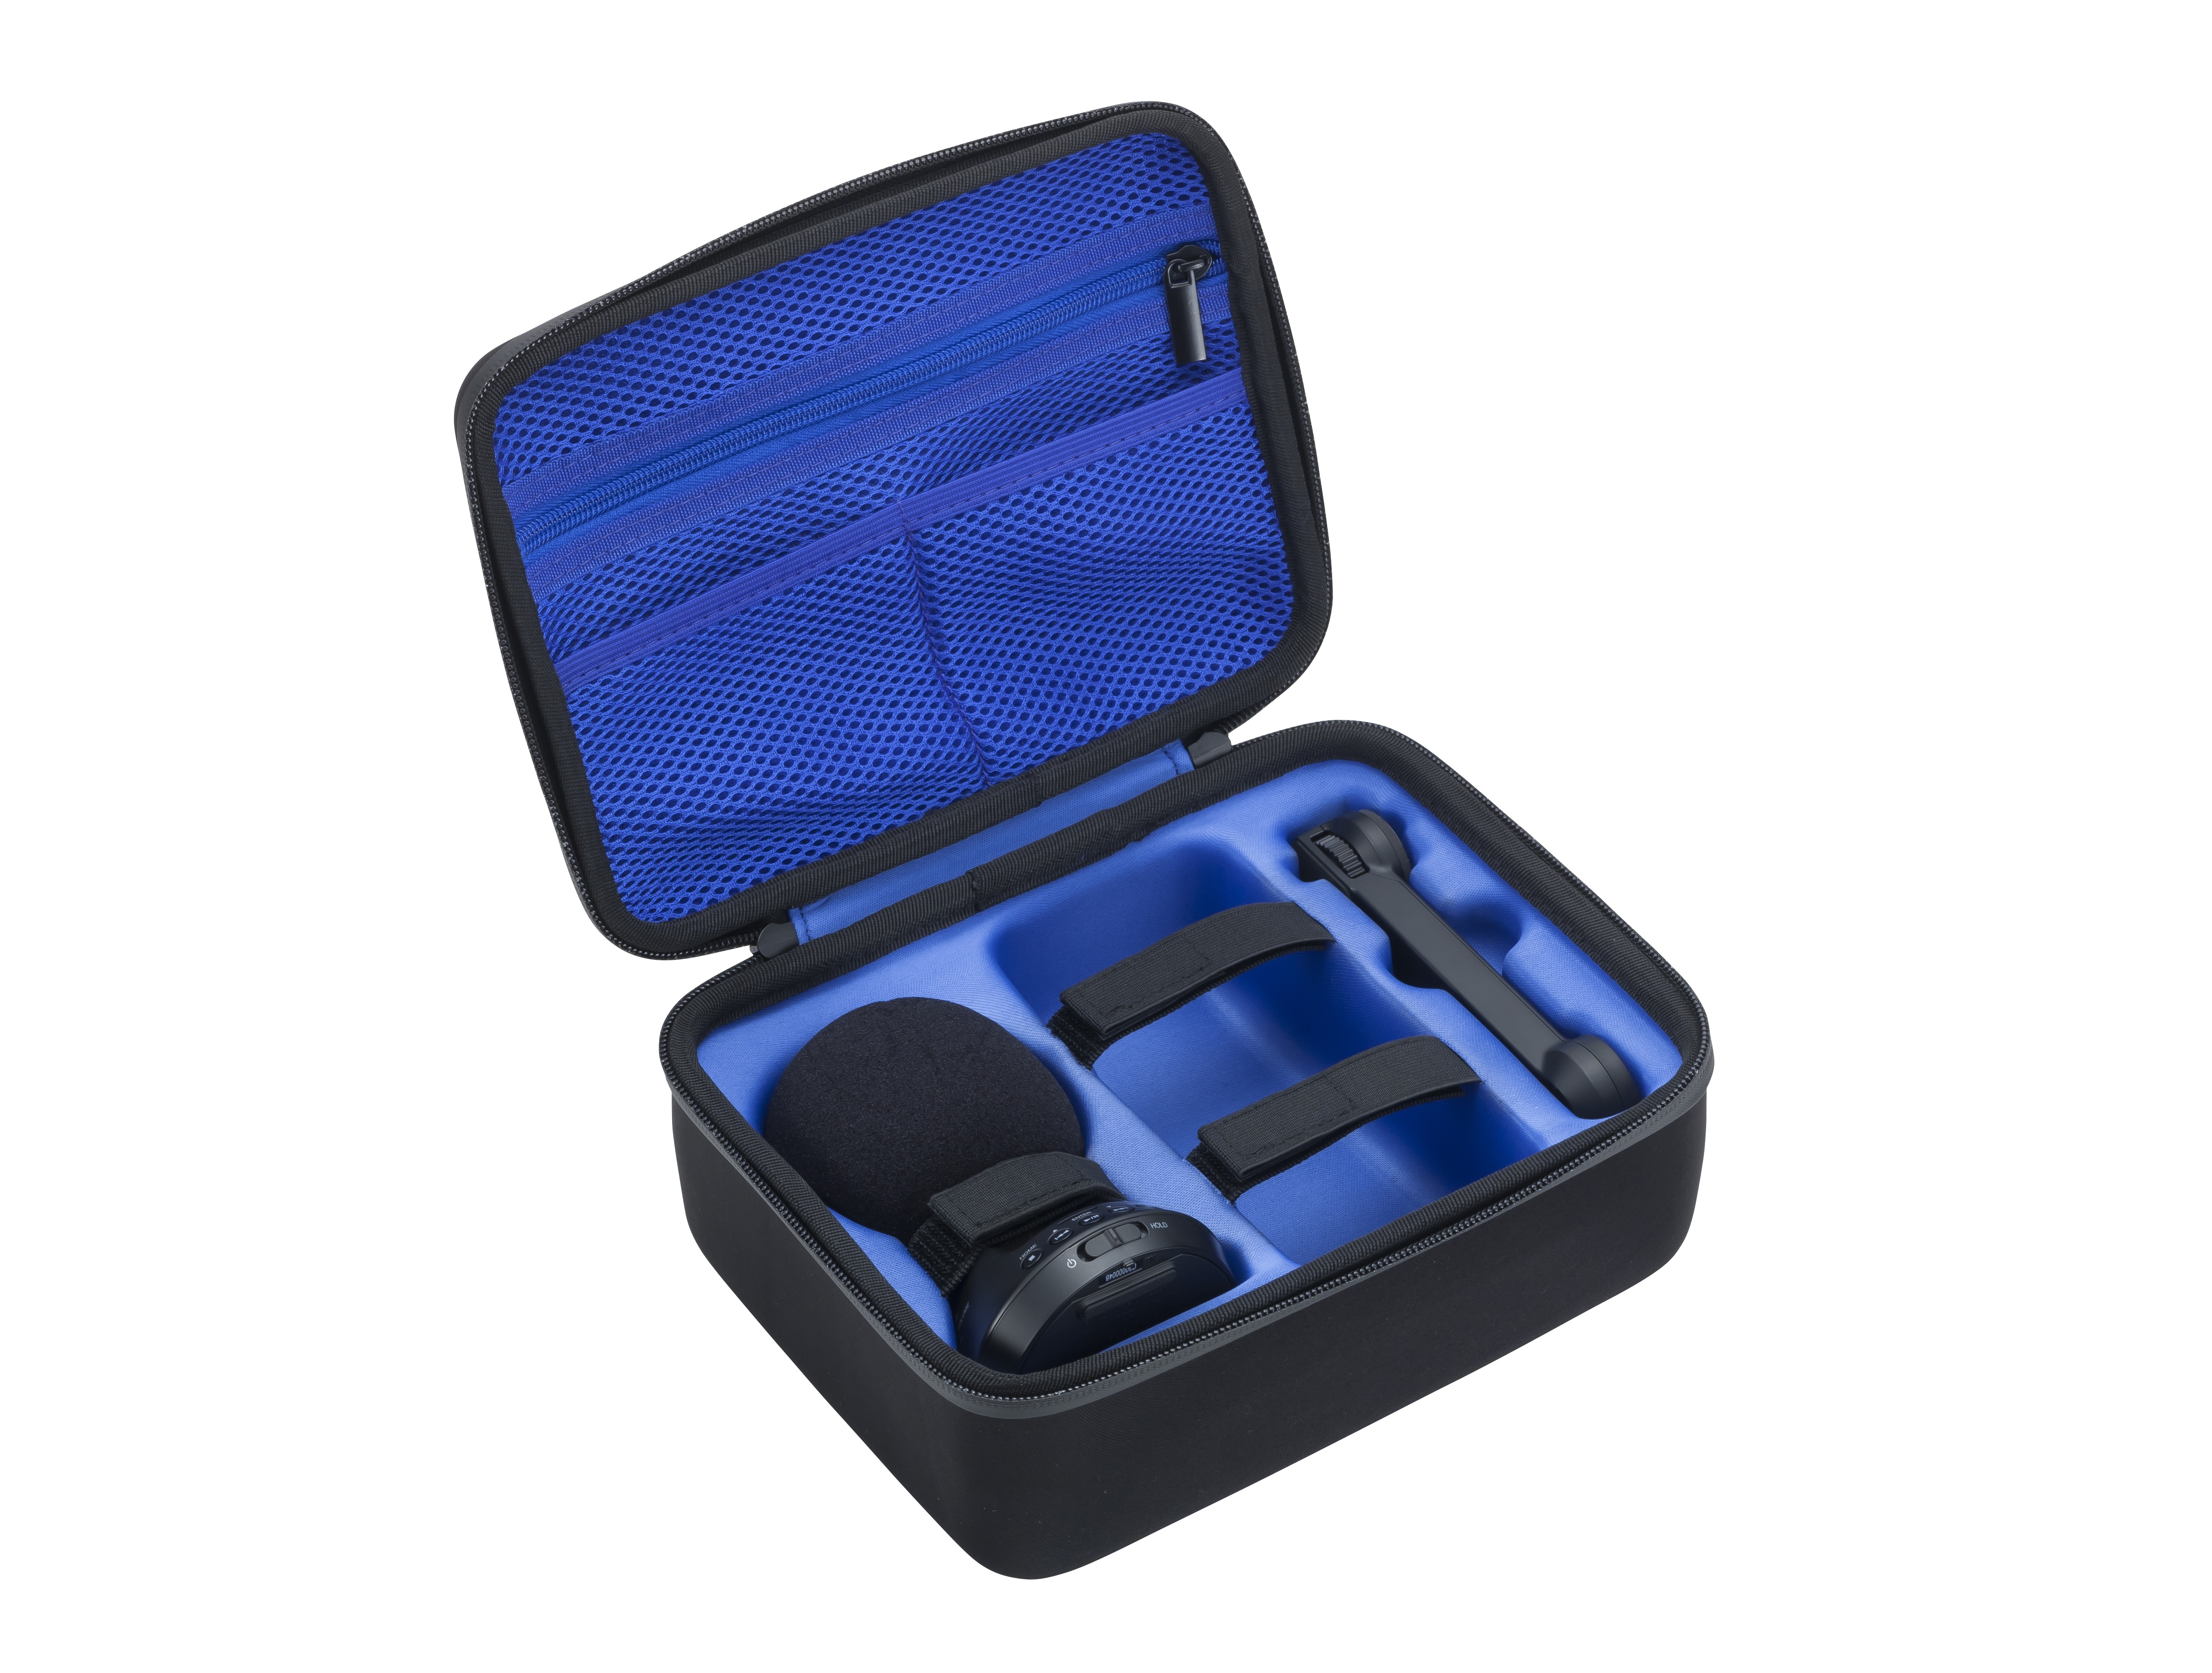 Zoom CBH-3 Carrying Bag for H3-VR Handy Recorder